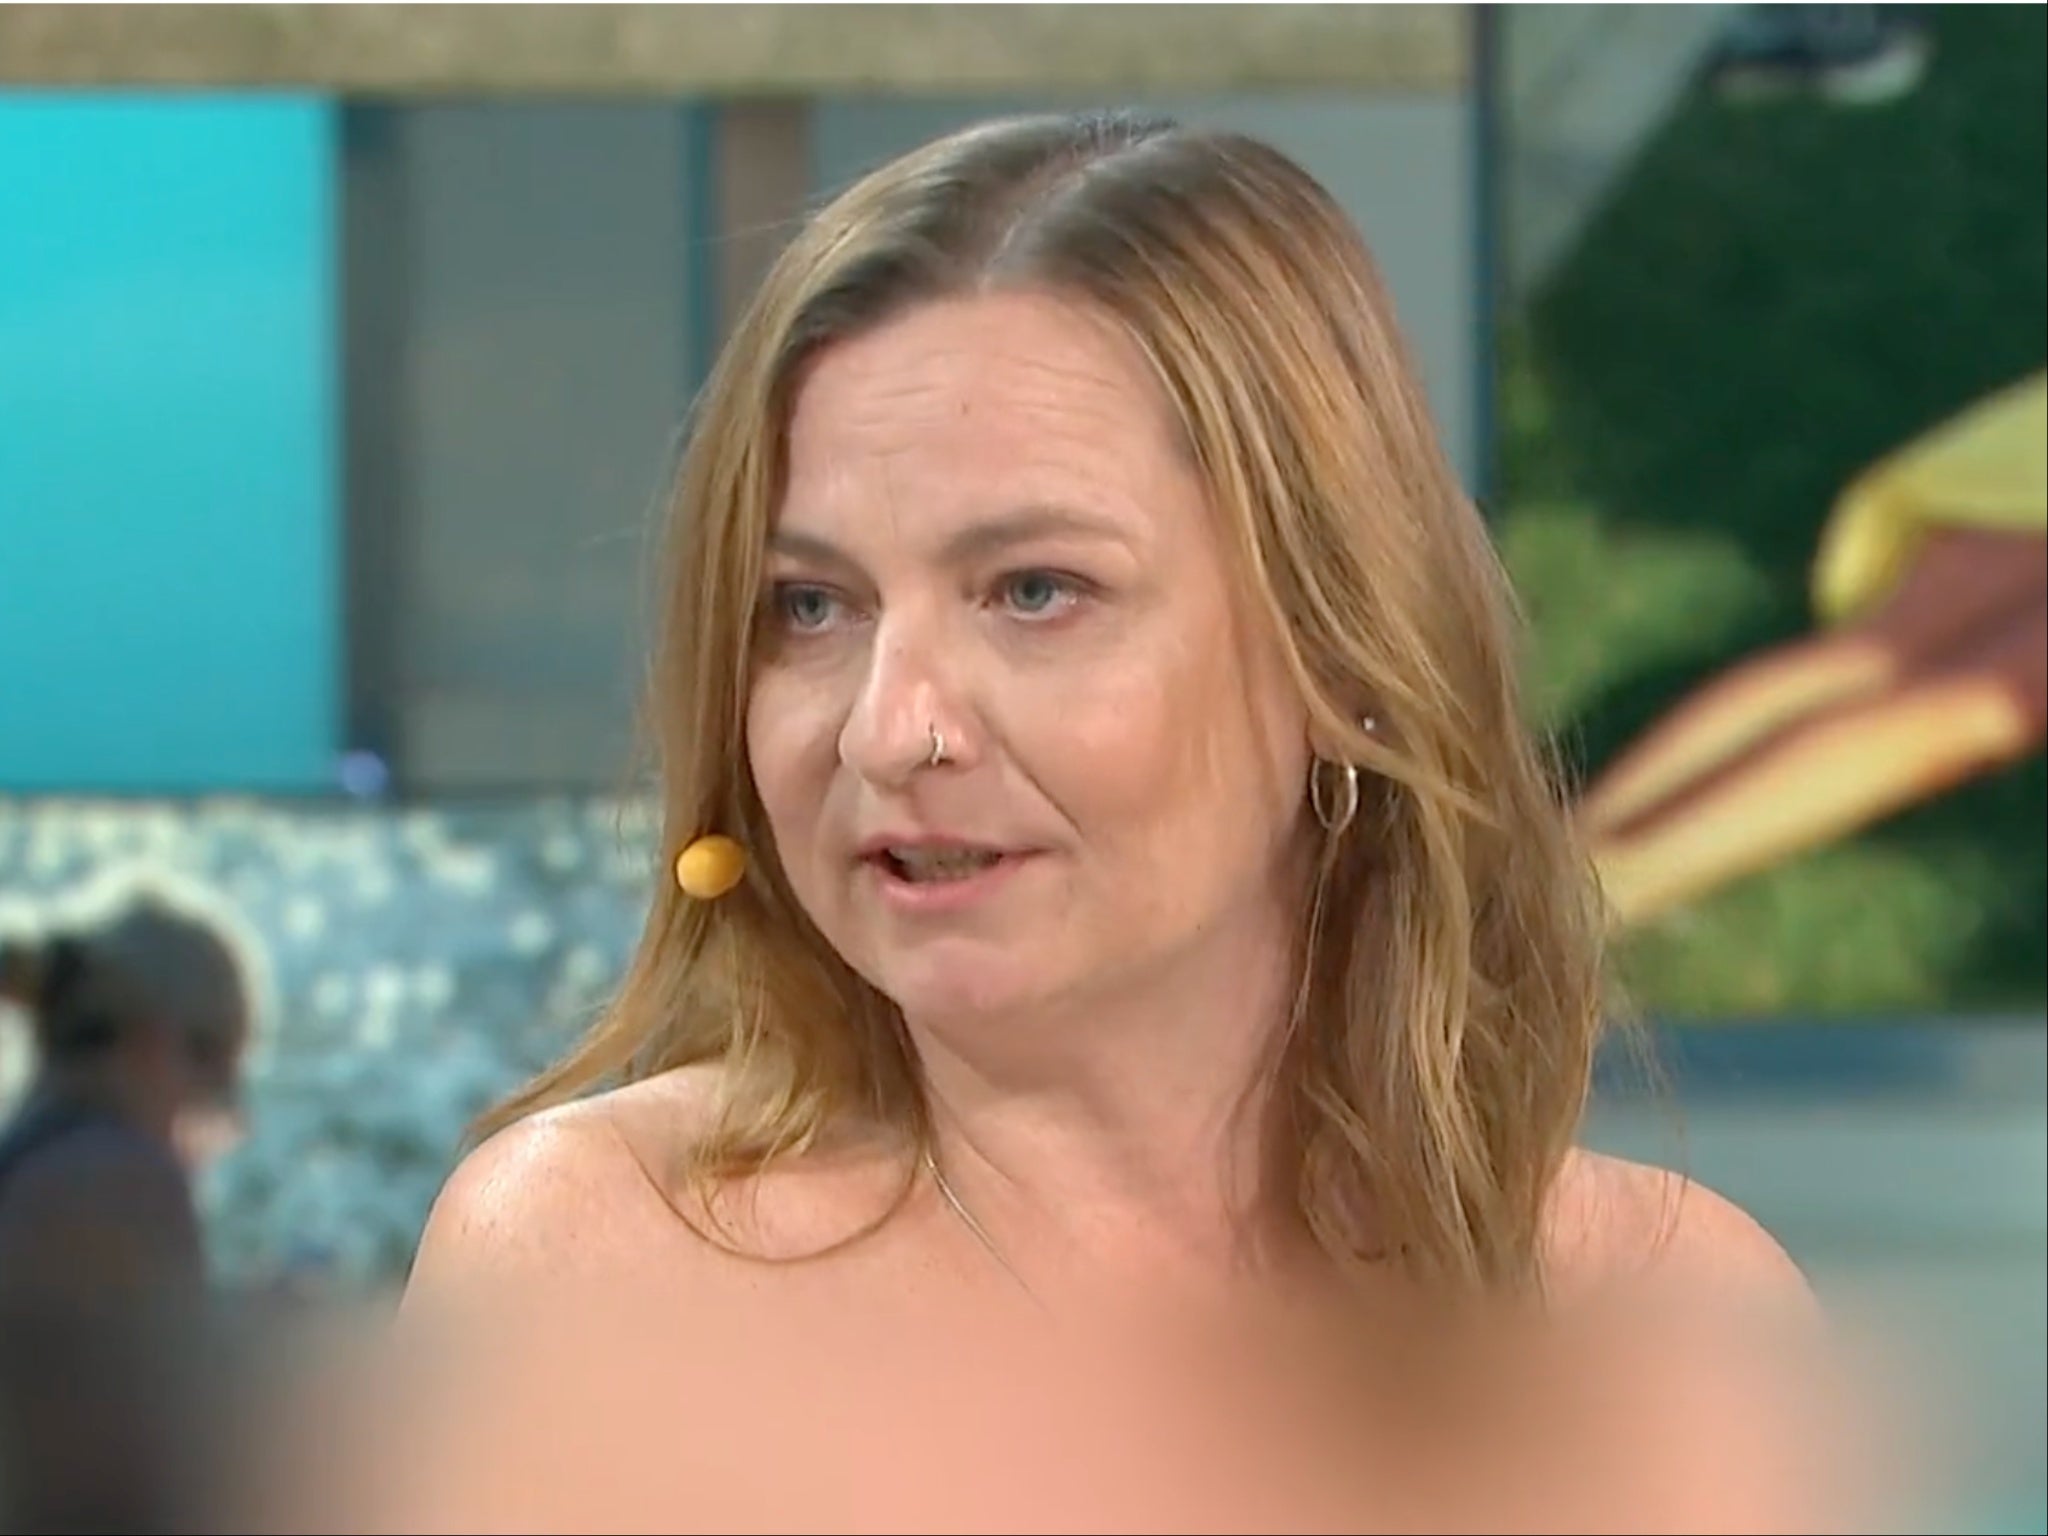 Naked woman appears on ITV show GMB to debate nude sunbathing The Independent